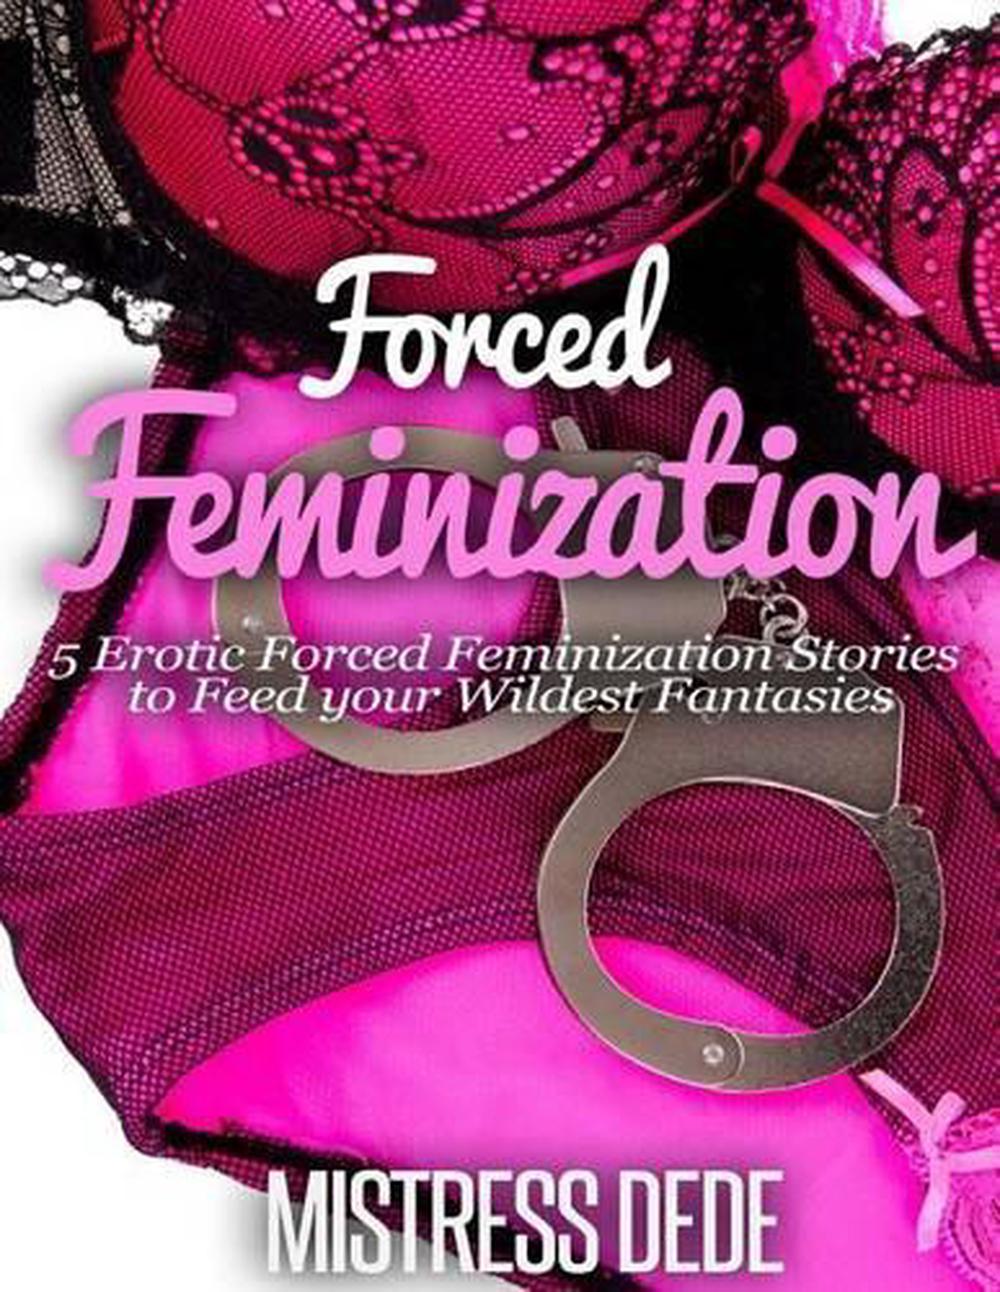 Forced feminization with hormones.